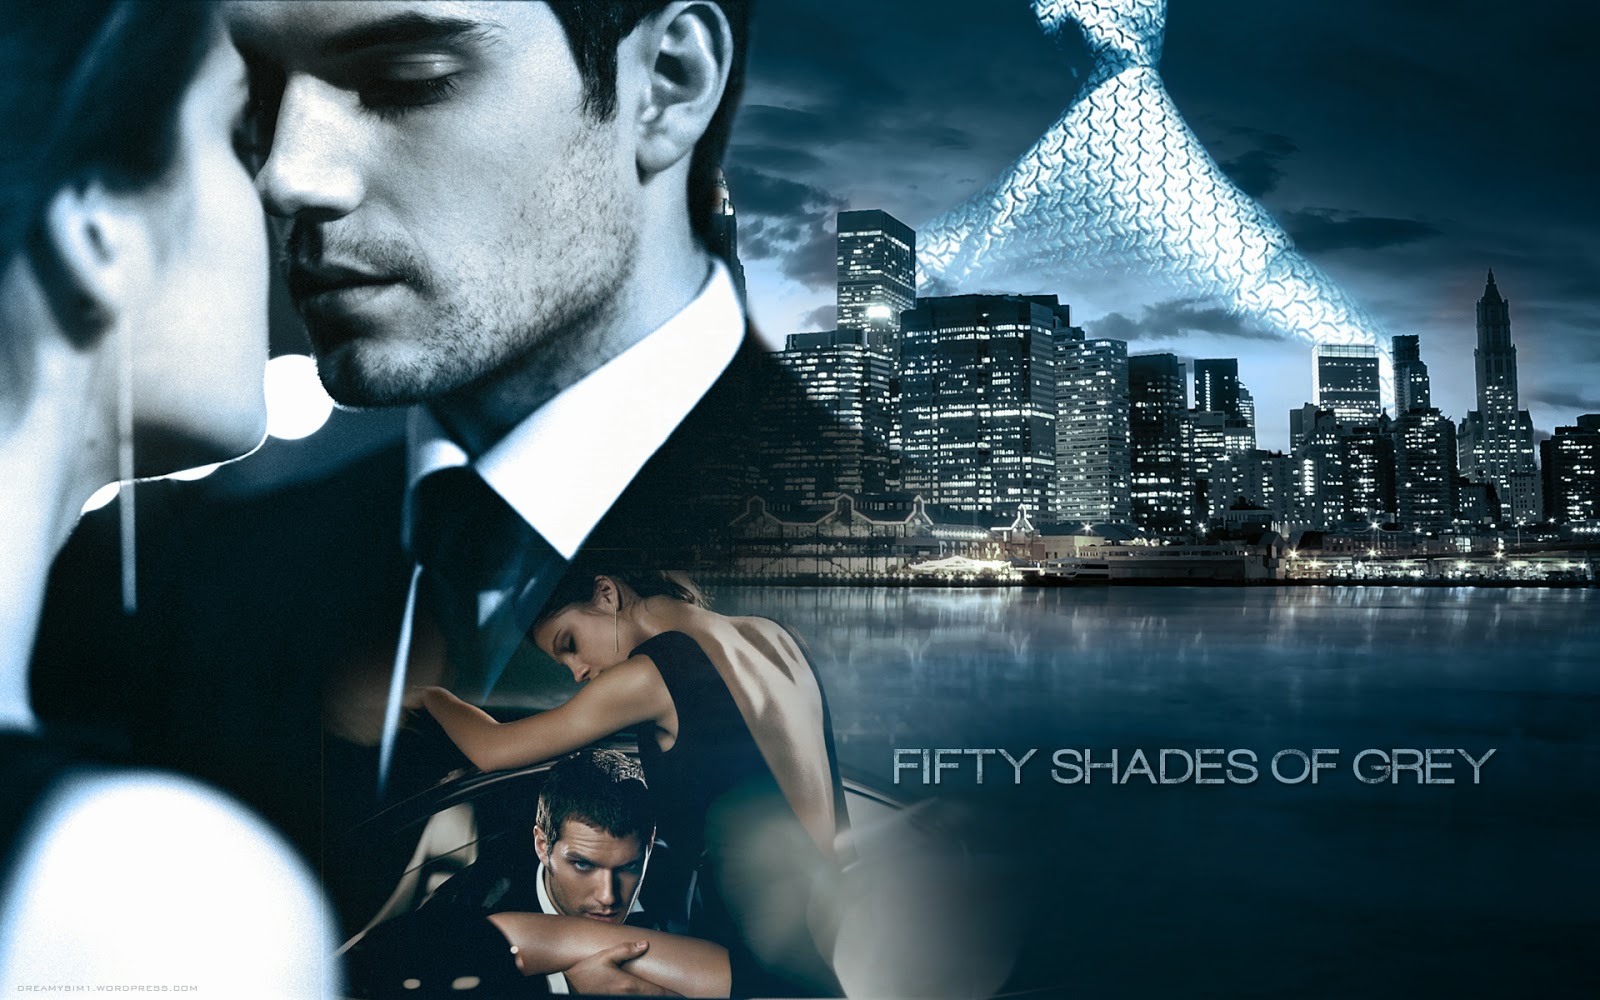 Where Can I Watch Fifty Shades Of Grey For Free - Download | Watch Fifty Shades Of Grey 2015 Online Free Streaming In HD